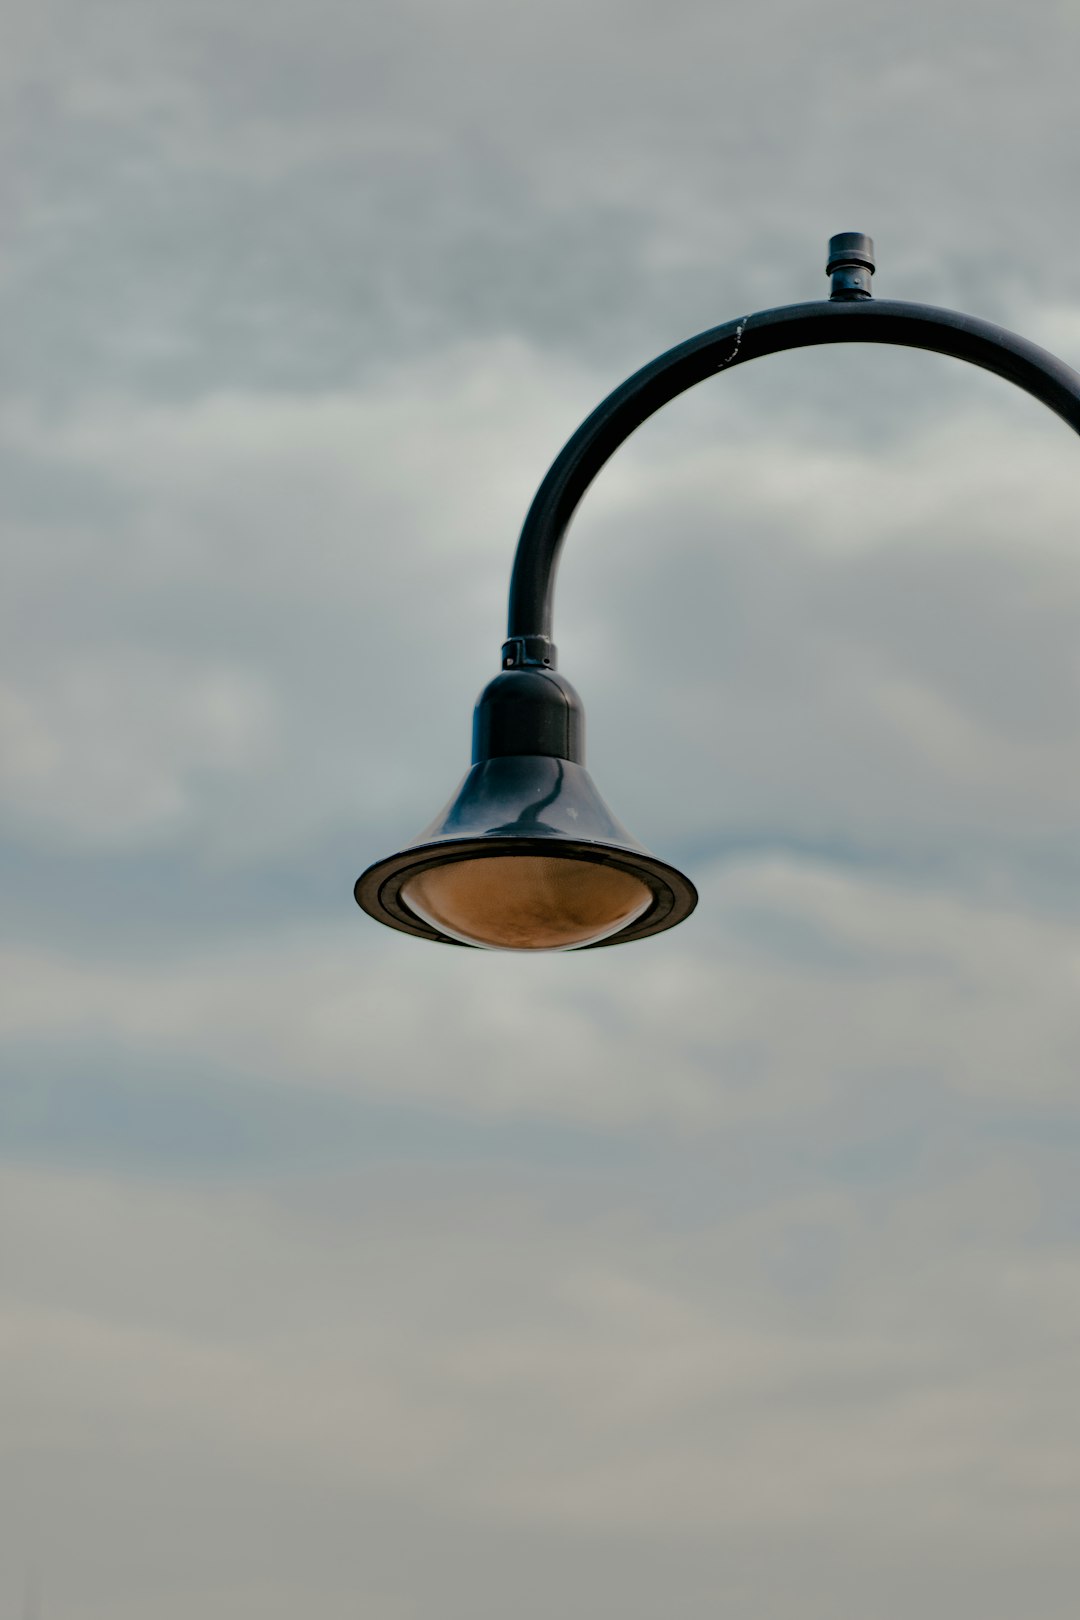 black and blue street light under cloudy sky during daytime